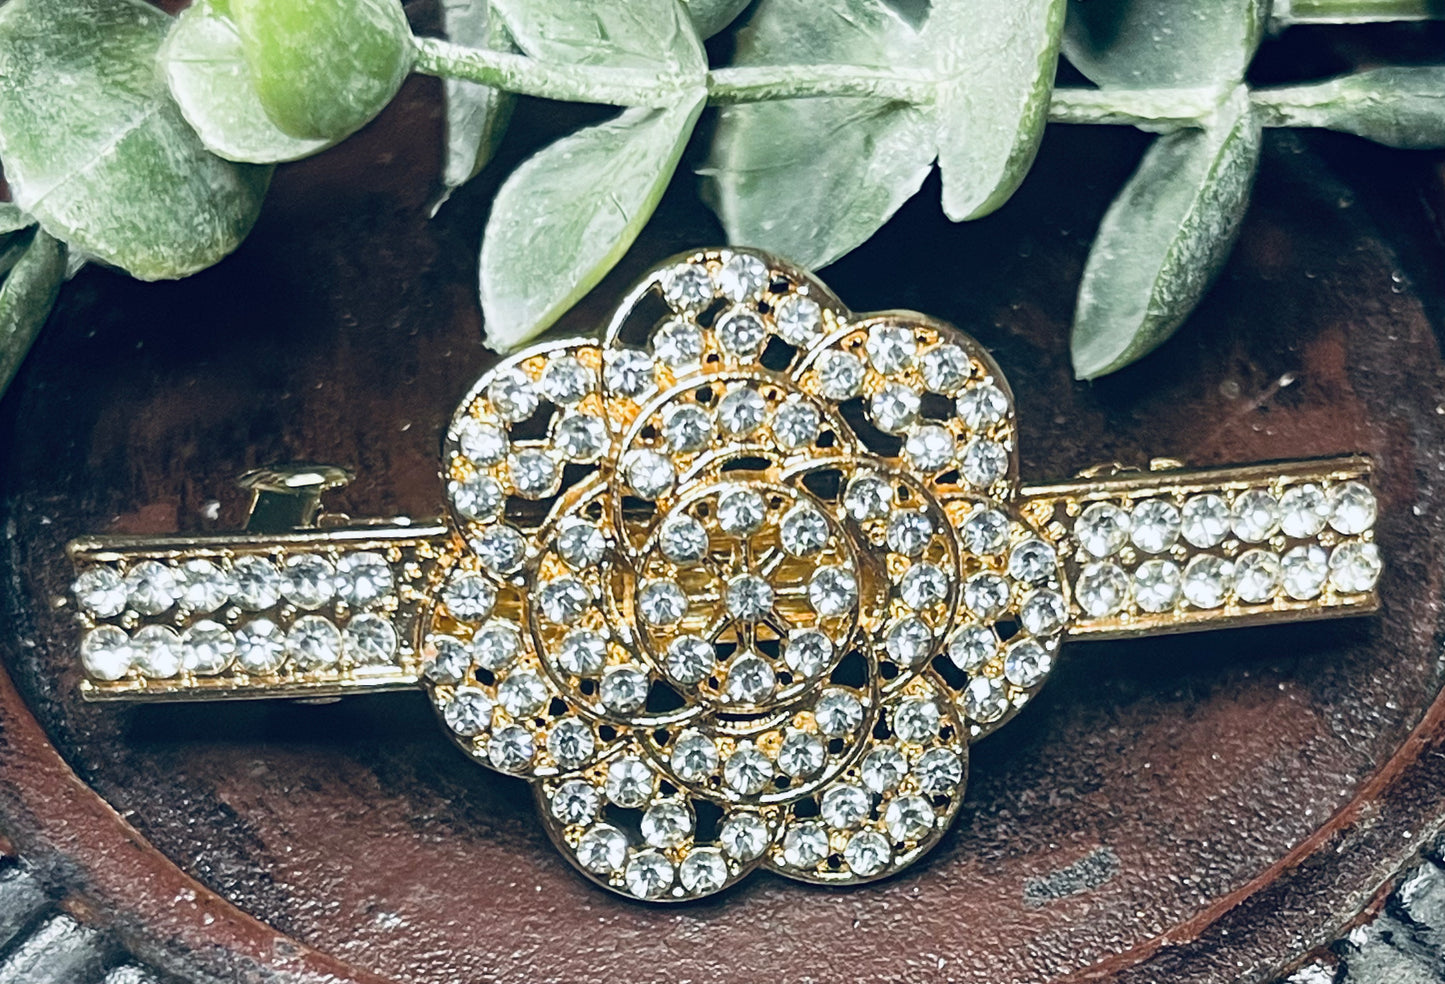 Clear flower Crystal rhinestone barrette approximately 3.0” gold tone formal hair accessories gift wedding bridesmaid prom birthday mother of bride groom